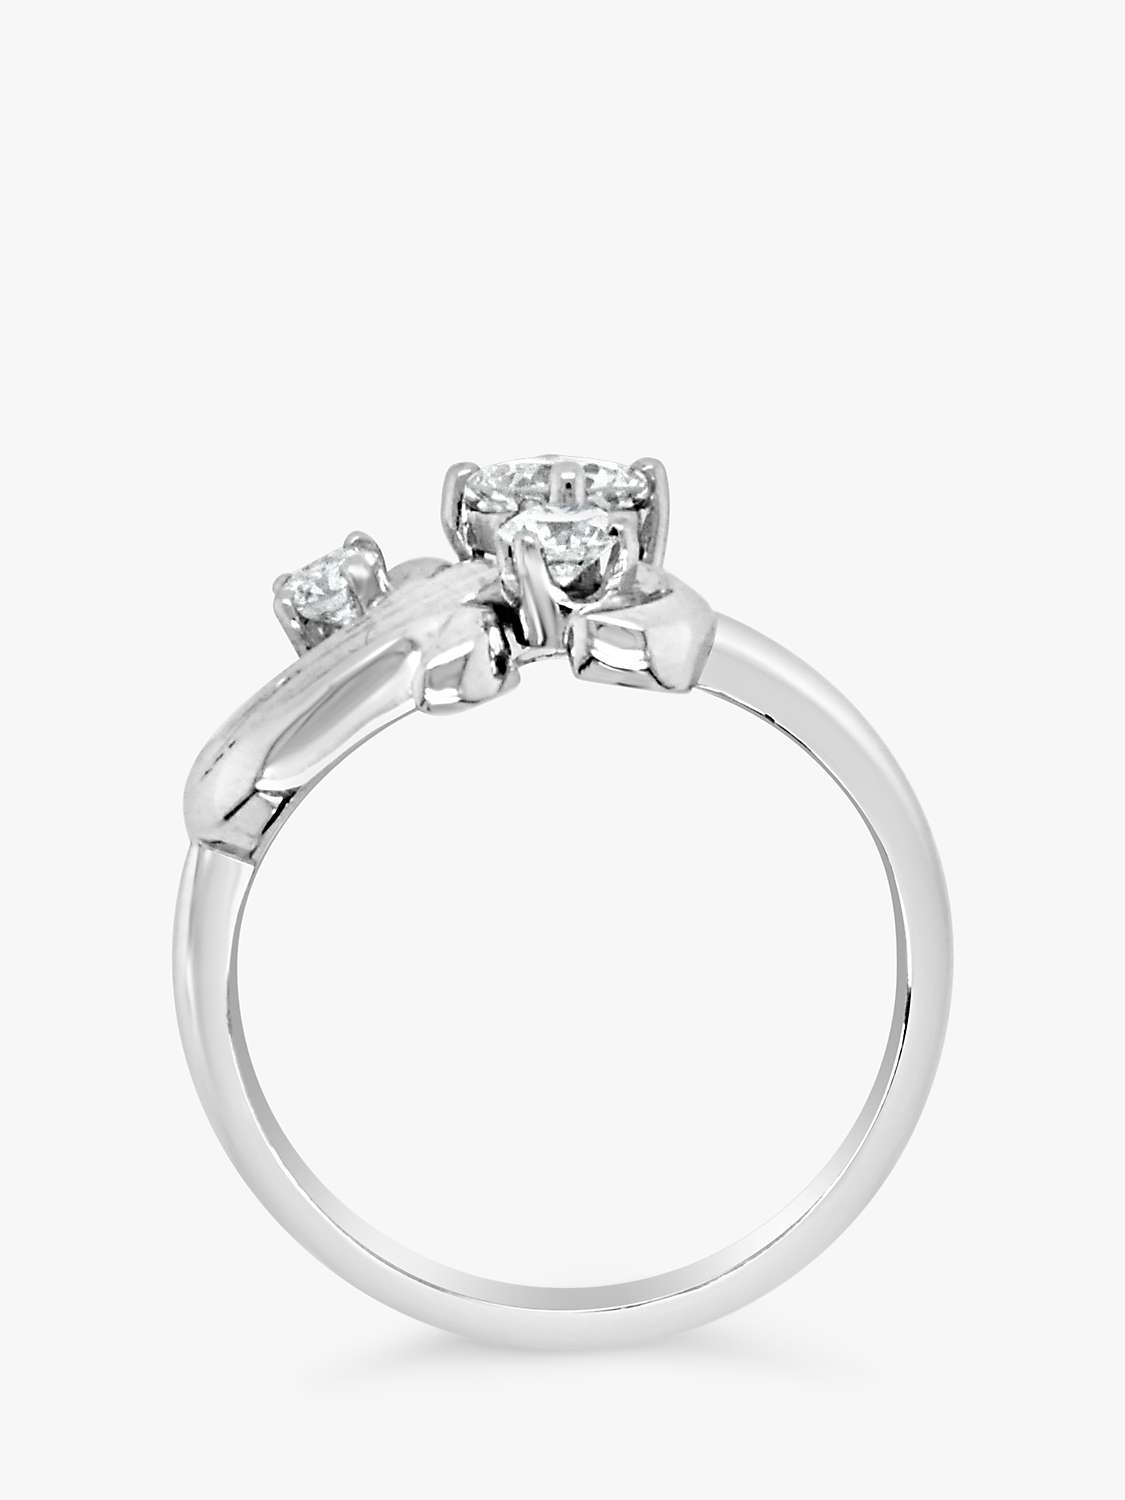 Buy Milton & Humble Jewellery Second Hand 14ct White Gold 3 Stone Diamond Ring Online at johnlewis.com